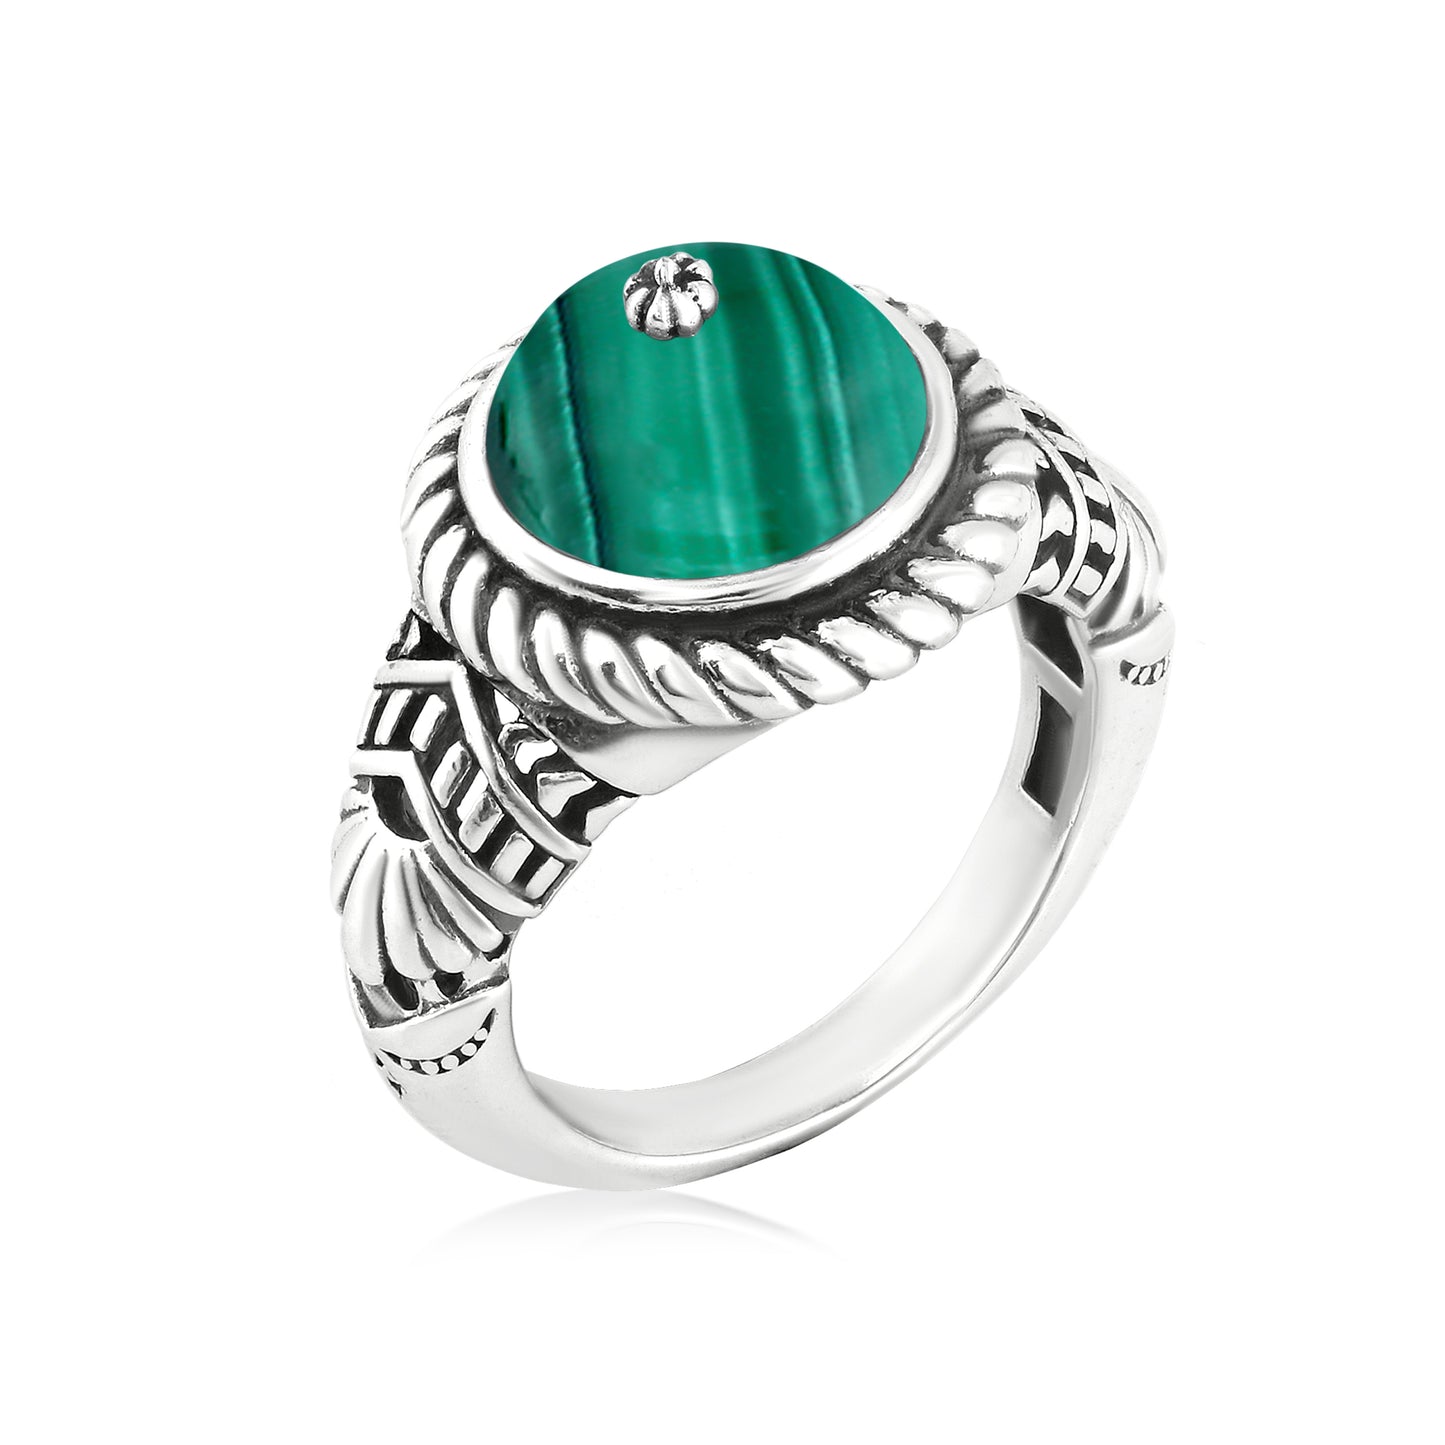 Southwestern Green Wildflower Ring-Crafted from Sterling Silver with Malachite Gemstone, Sizes 5- 10